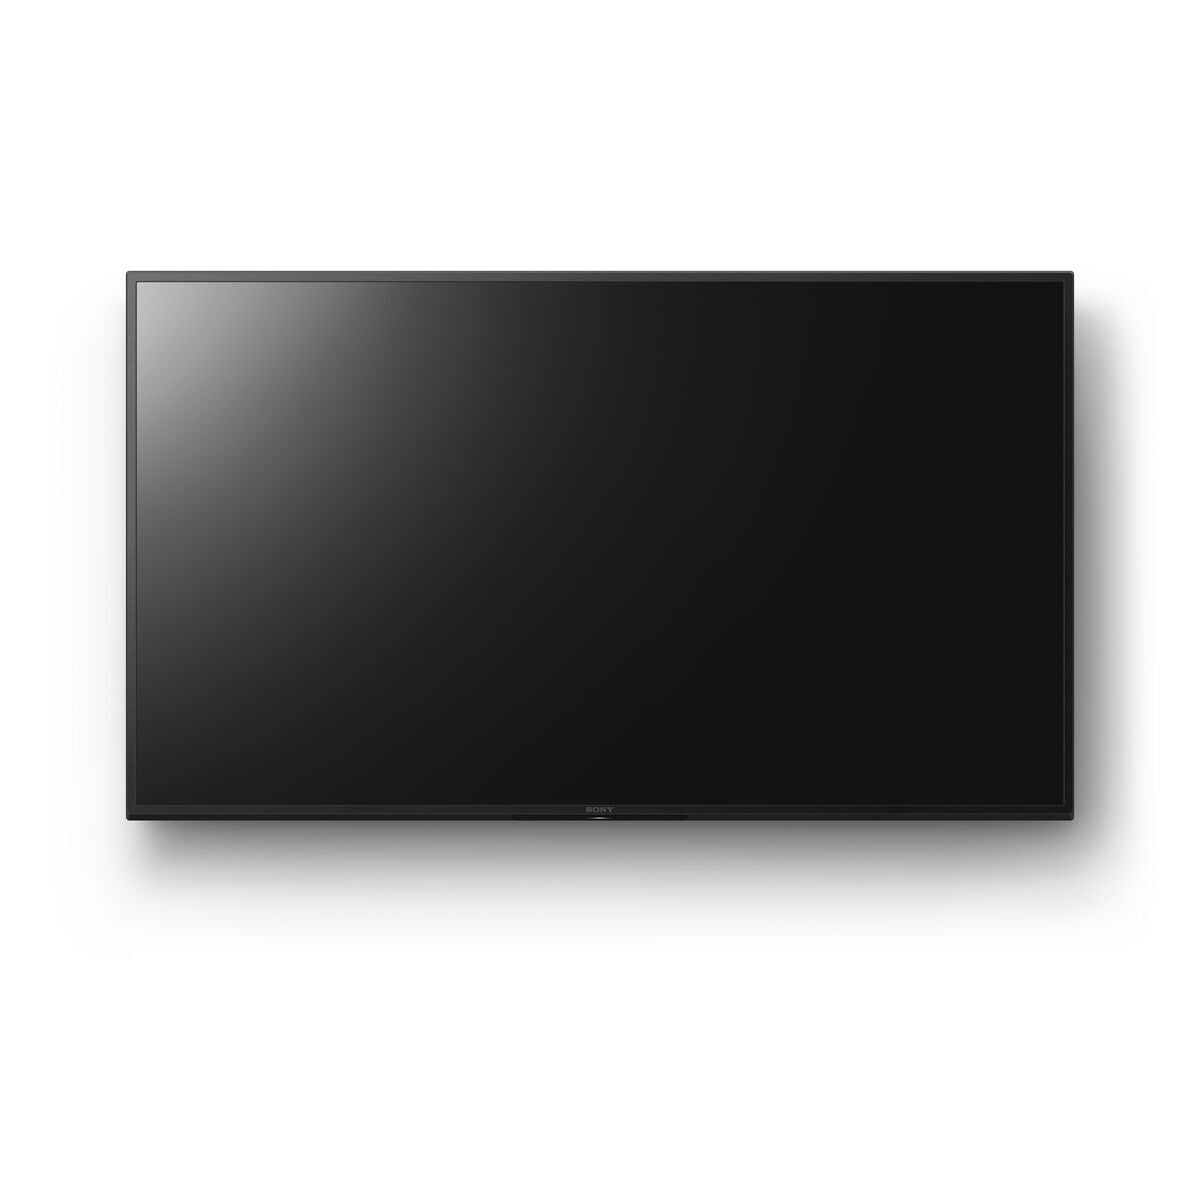 Television Sony FW-65BZ30J 65" 4K Ultra HD IPS D-LED HDR10, Sony, Electronics, TV, Video and home cinema, television-sony-fw-65bz30j-65-4k-ultra-hd-ips-d-led-hdr10, : 65 INCHES 165 CM, :65 INCHES or 165.1 CM, :Direct LED, :Ultra HD, Brand_Sony, category-reference-2609, category-reference-2625, category-reference-2931, category-reference-t-18805, category-reference-t-19653, cinema and television, Condition_NEW, entertainment, Price_+ 1000, RiotNook